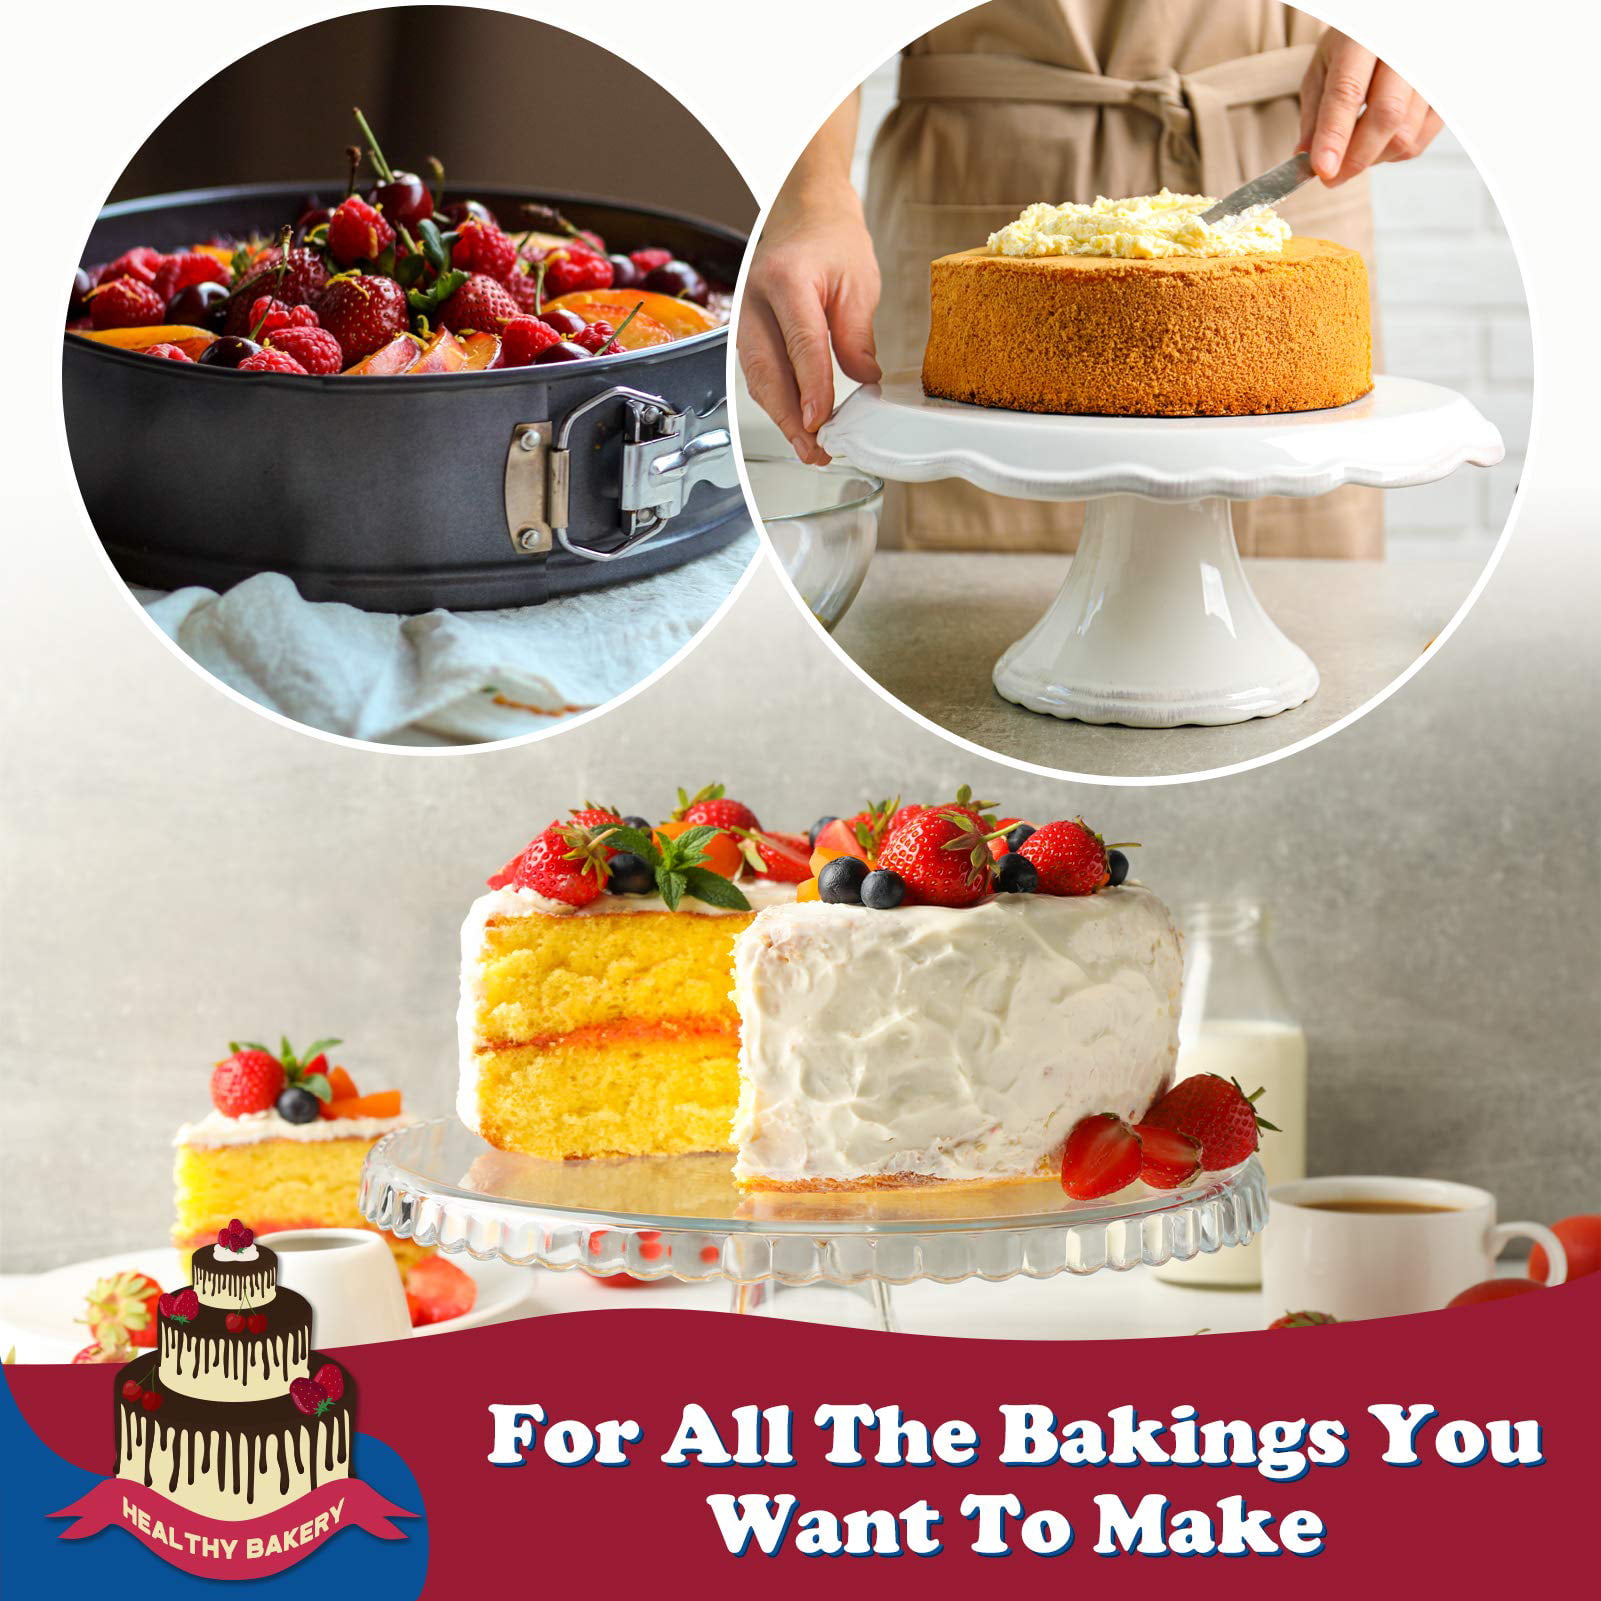 Hiware 6 Inch Non-stick Springform Pan with Removable Bottom - Leakproof Cheesecake  Pan Bakeware, Compatible with 3 Qt Instant Pot - Shop - TexasRealFood